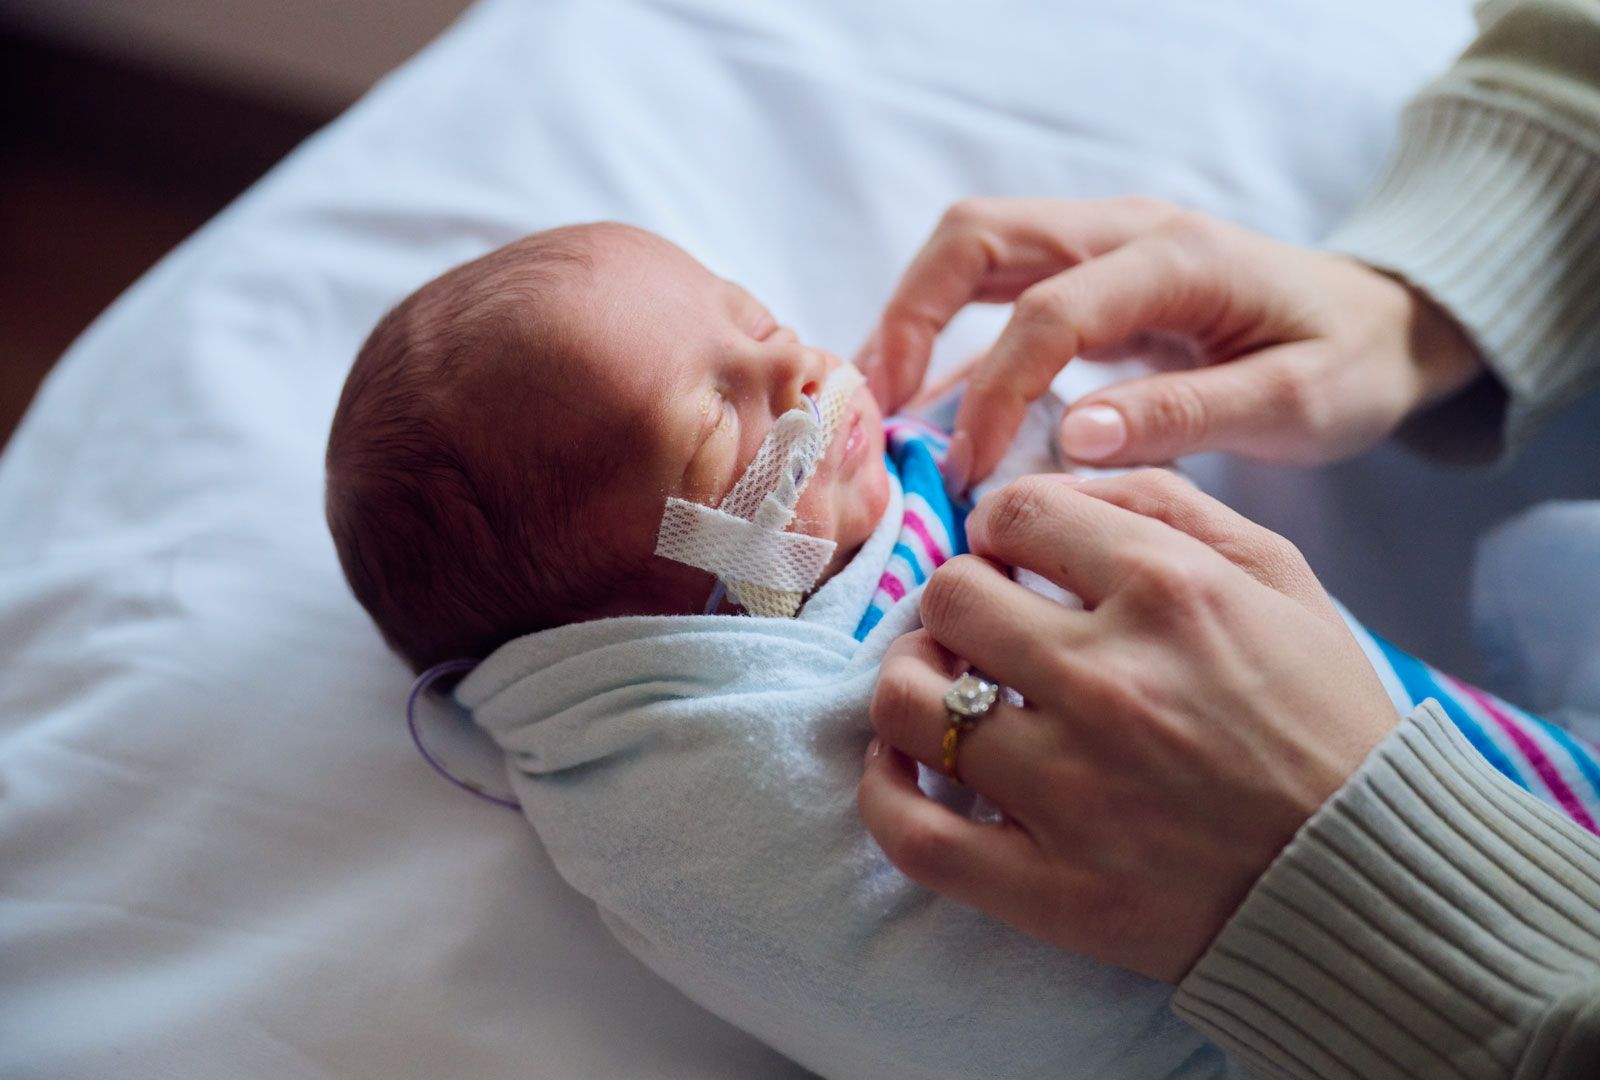 Hands tending to tightly wrapped newborn baby